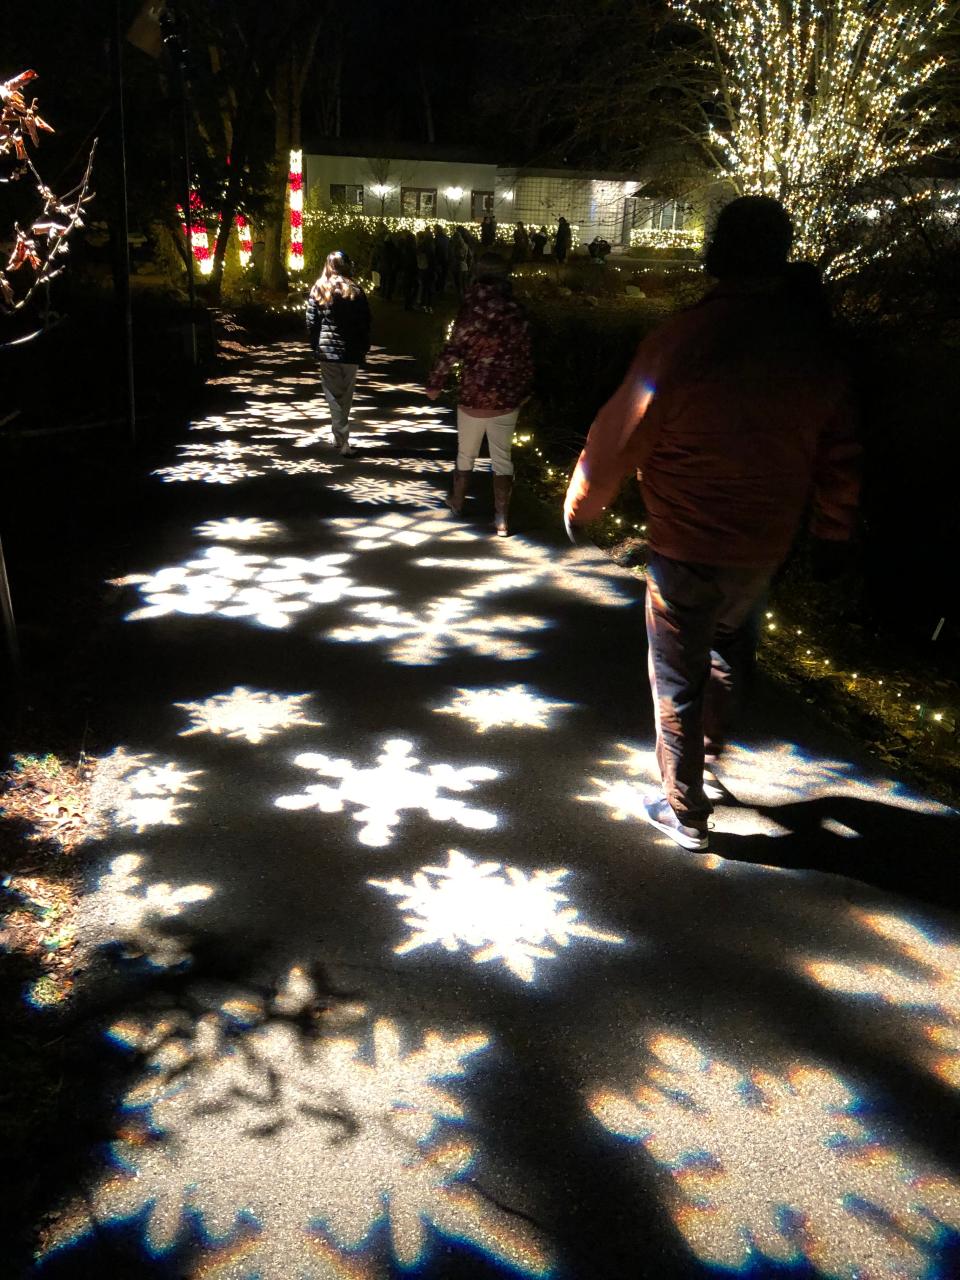 Fernwood Botanic Gardens brings back a light display that debuted in 2021, including these snowflakes projected onto a path.